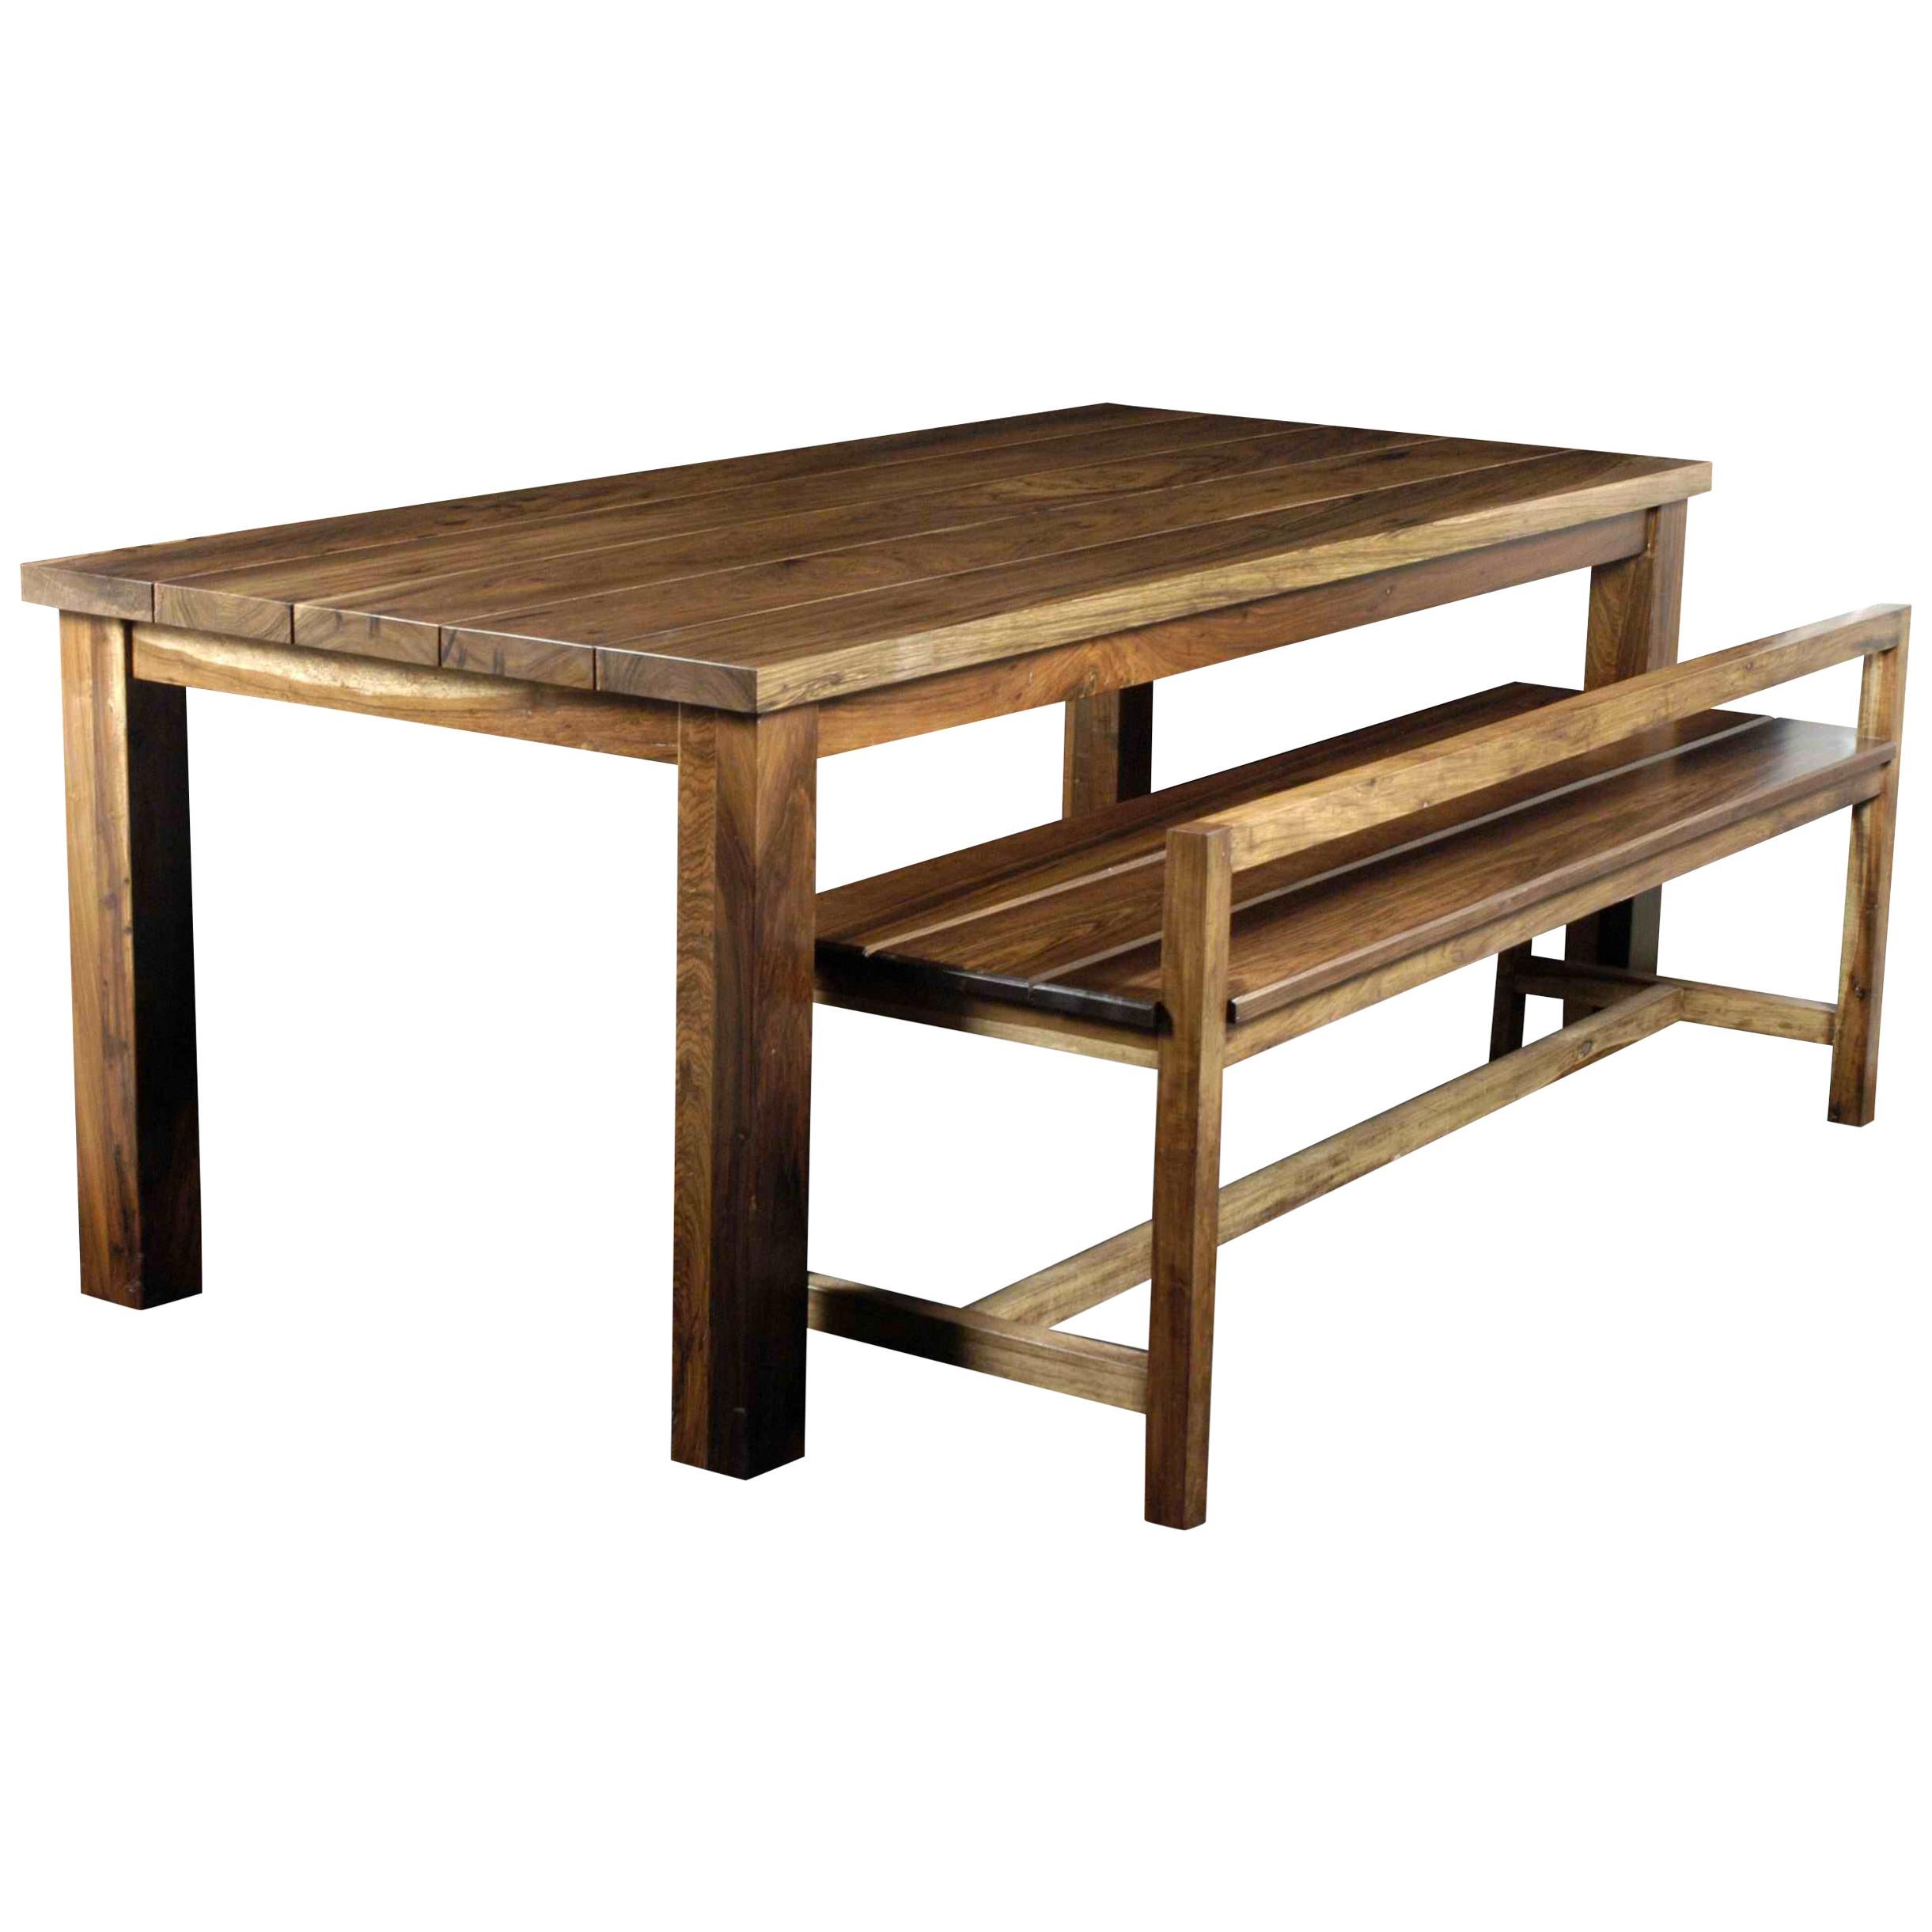 Exotic Solid Wood Modern Outdoor Dining Table from Costantini, Serrano